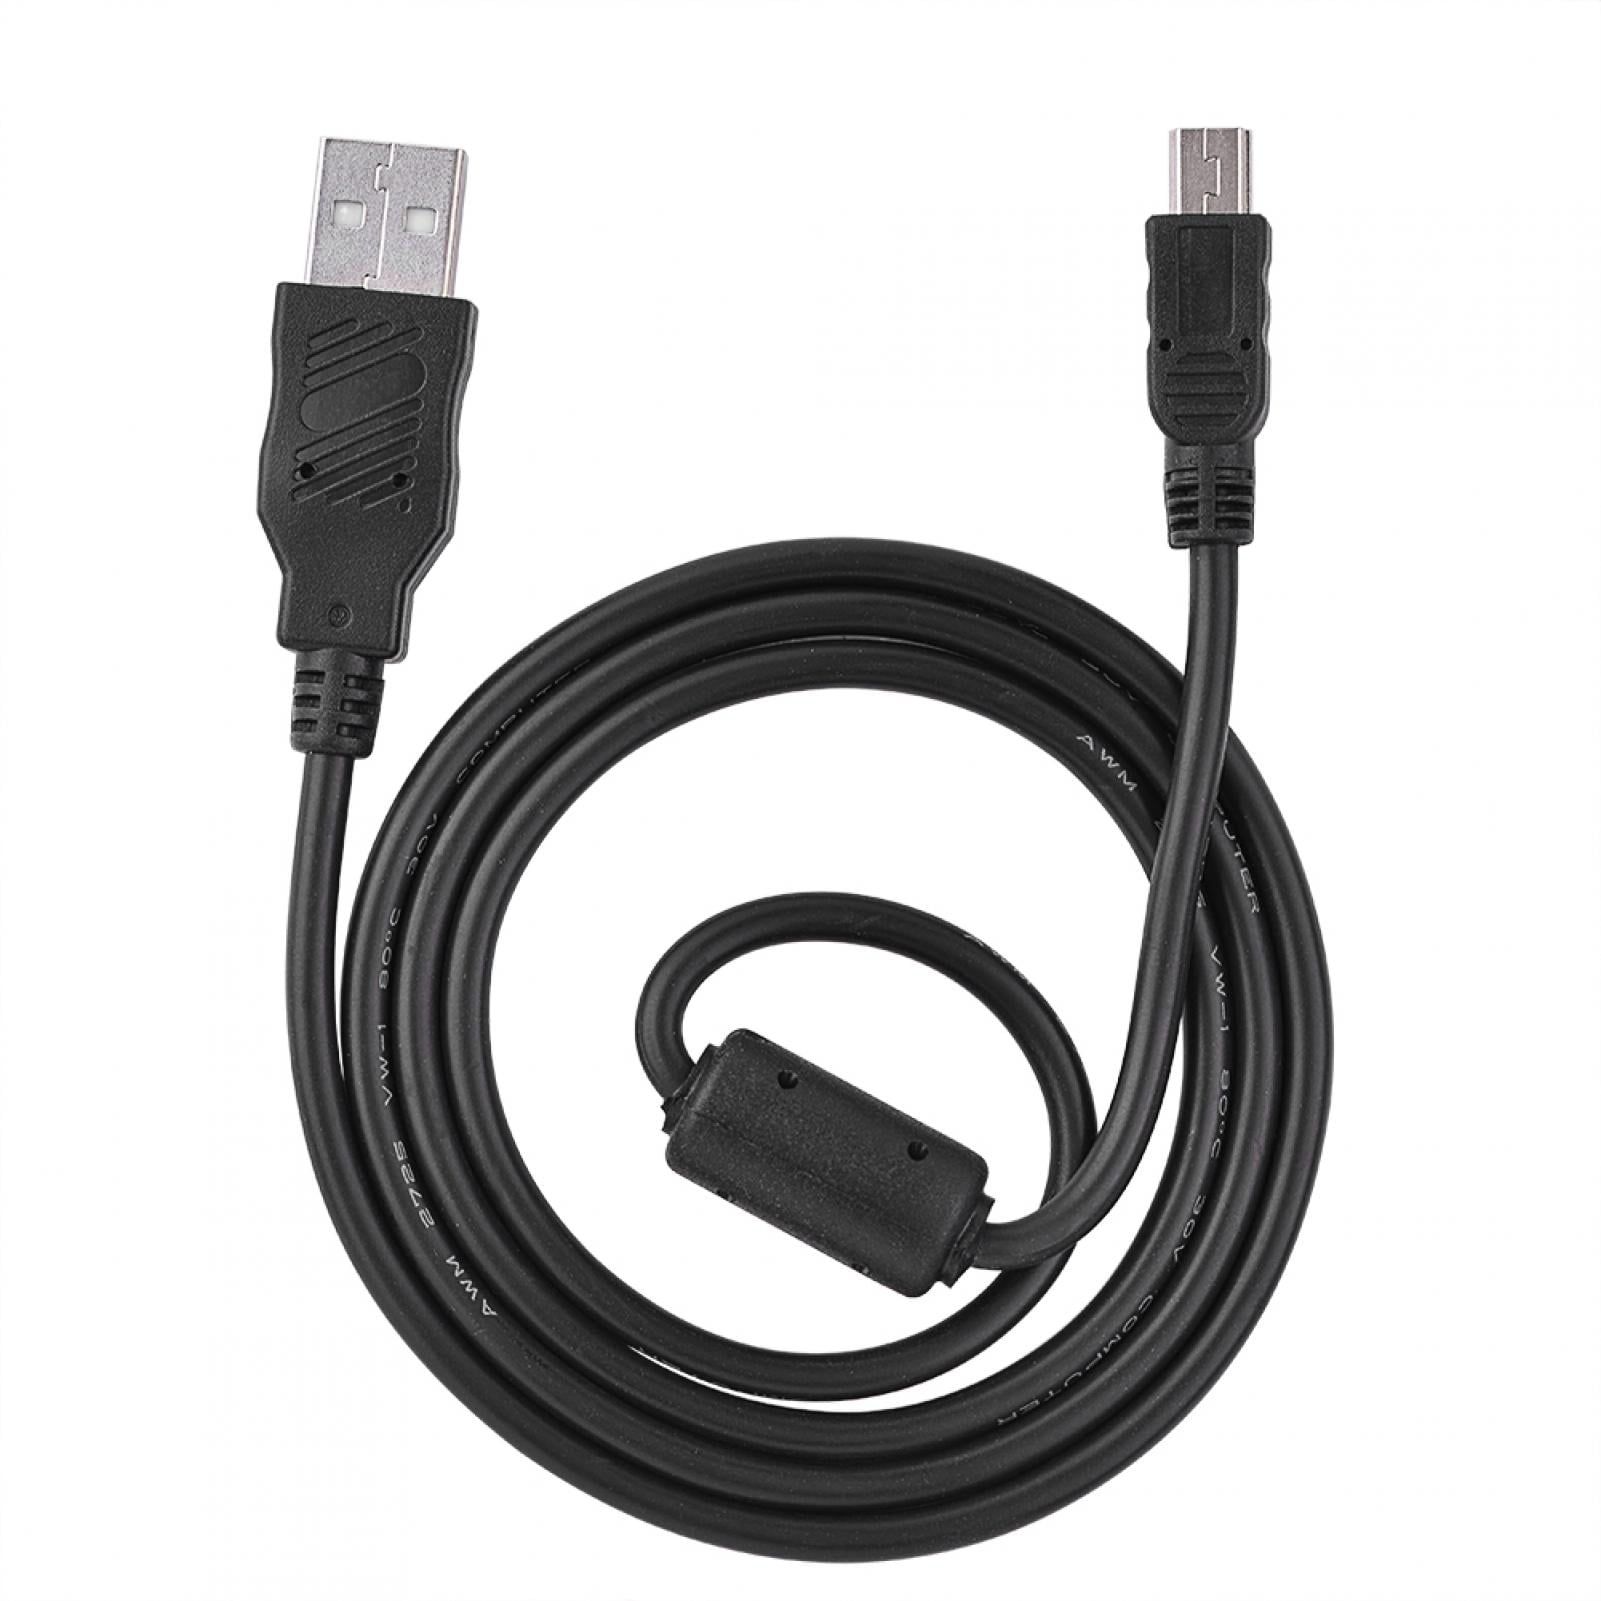 Vani USB Cable Cord for Canon PowerShot A570 IS A580 A590 IS A610 A620 A630 A640 